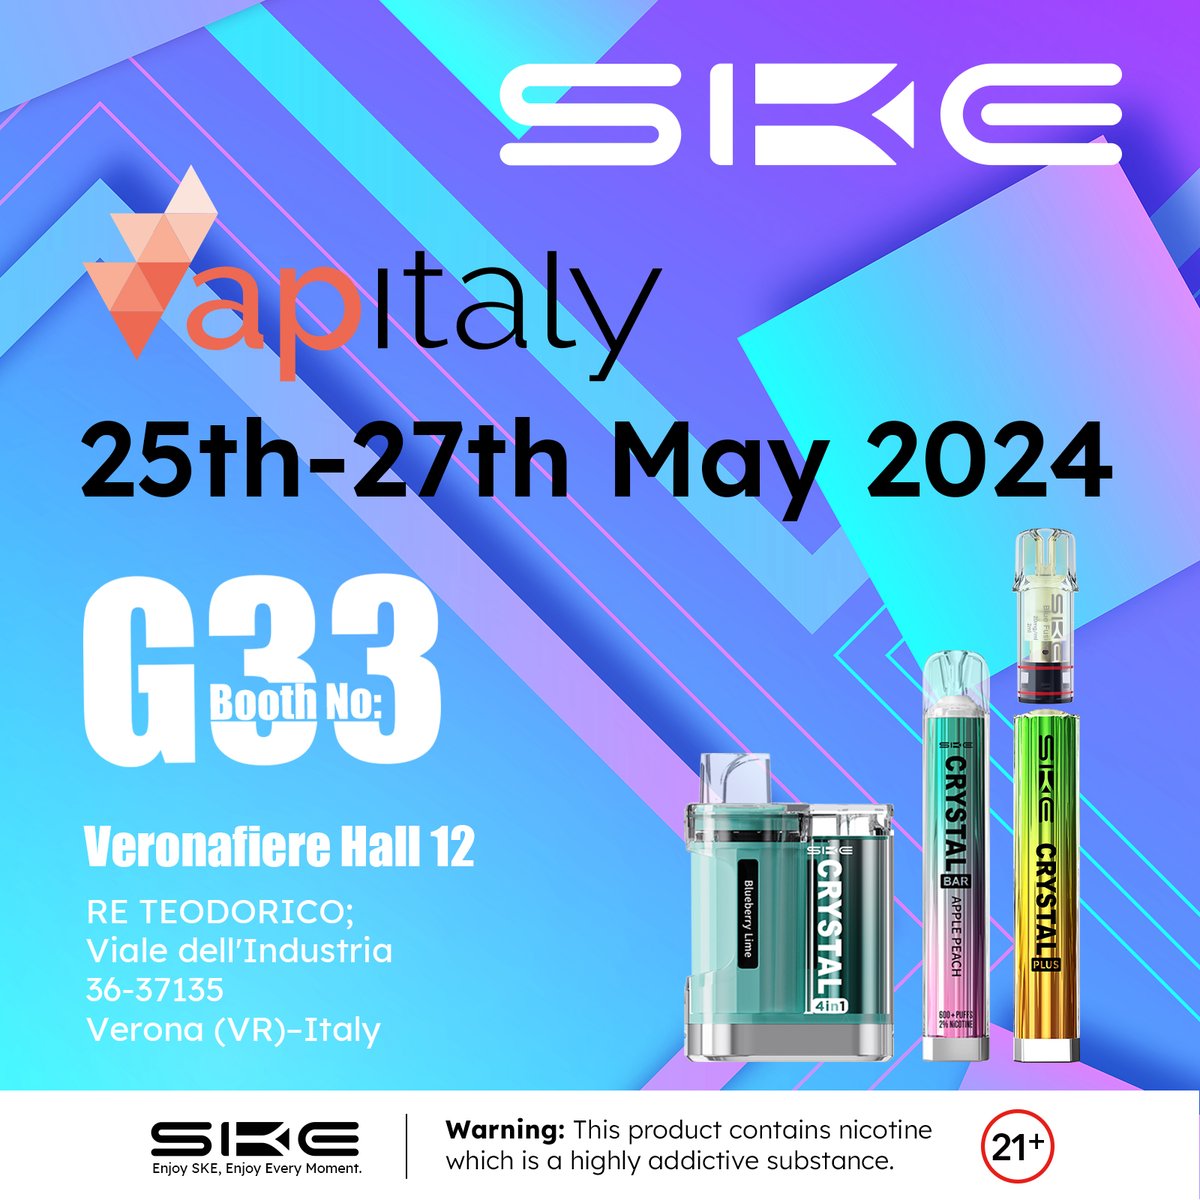 ✨Get ready to dive into the world of vaping at #vapitaly

🙌 Join us at Booth G33, Veronafiere Hall 12, from May 25th to 27th, 2024, and immerse yourself in the latest products from SKE. See you there!❤️

Warning: You must be 21+
#skevape #ske #vapelove #vapefam #vapefamily